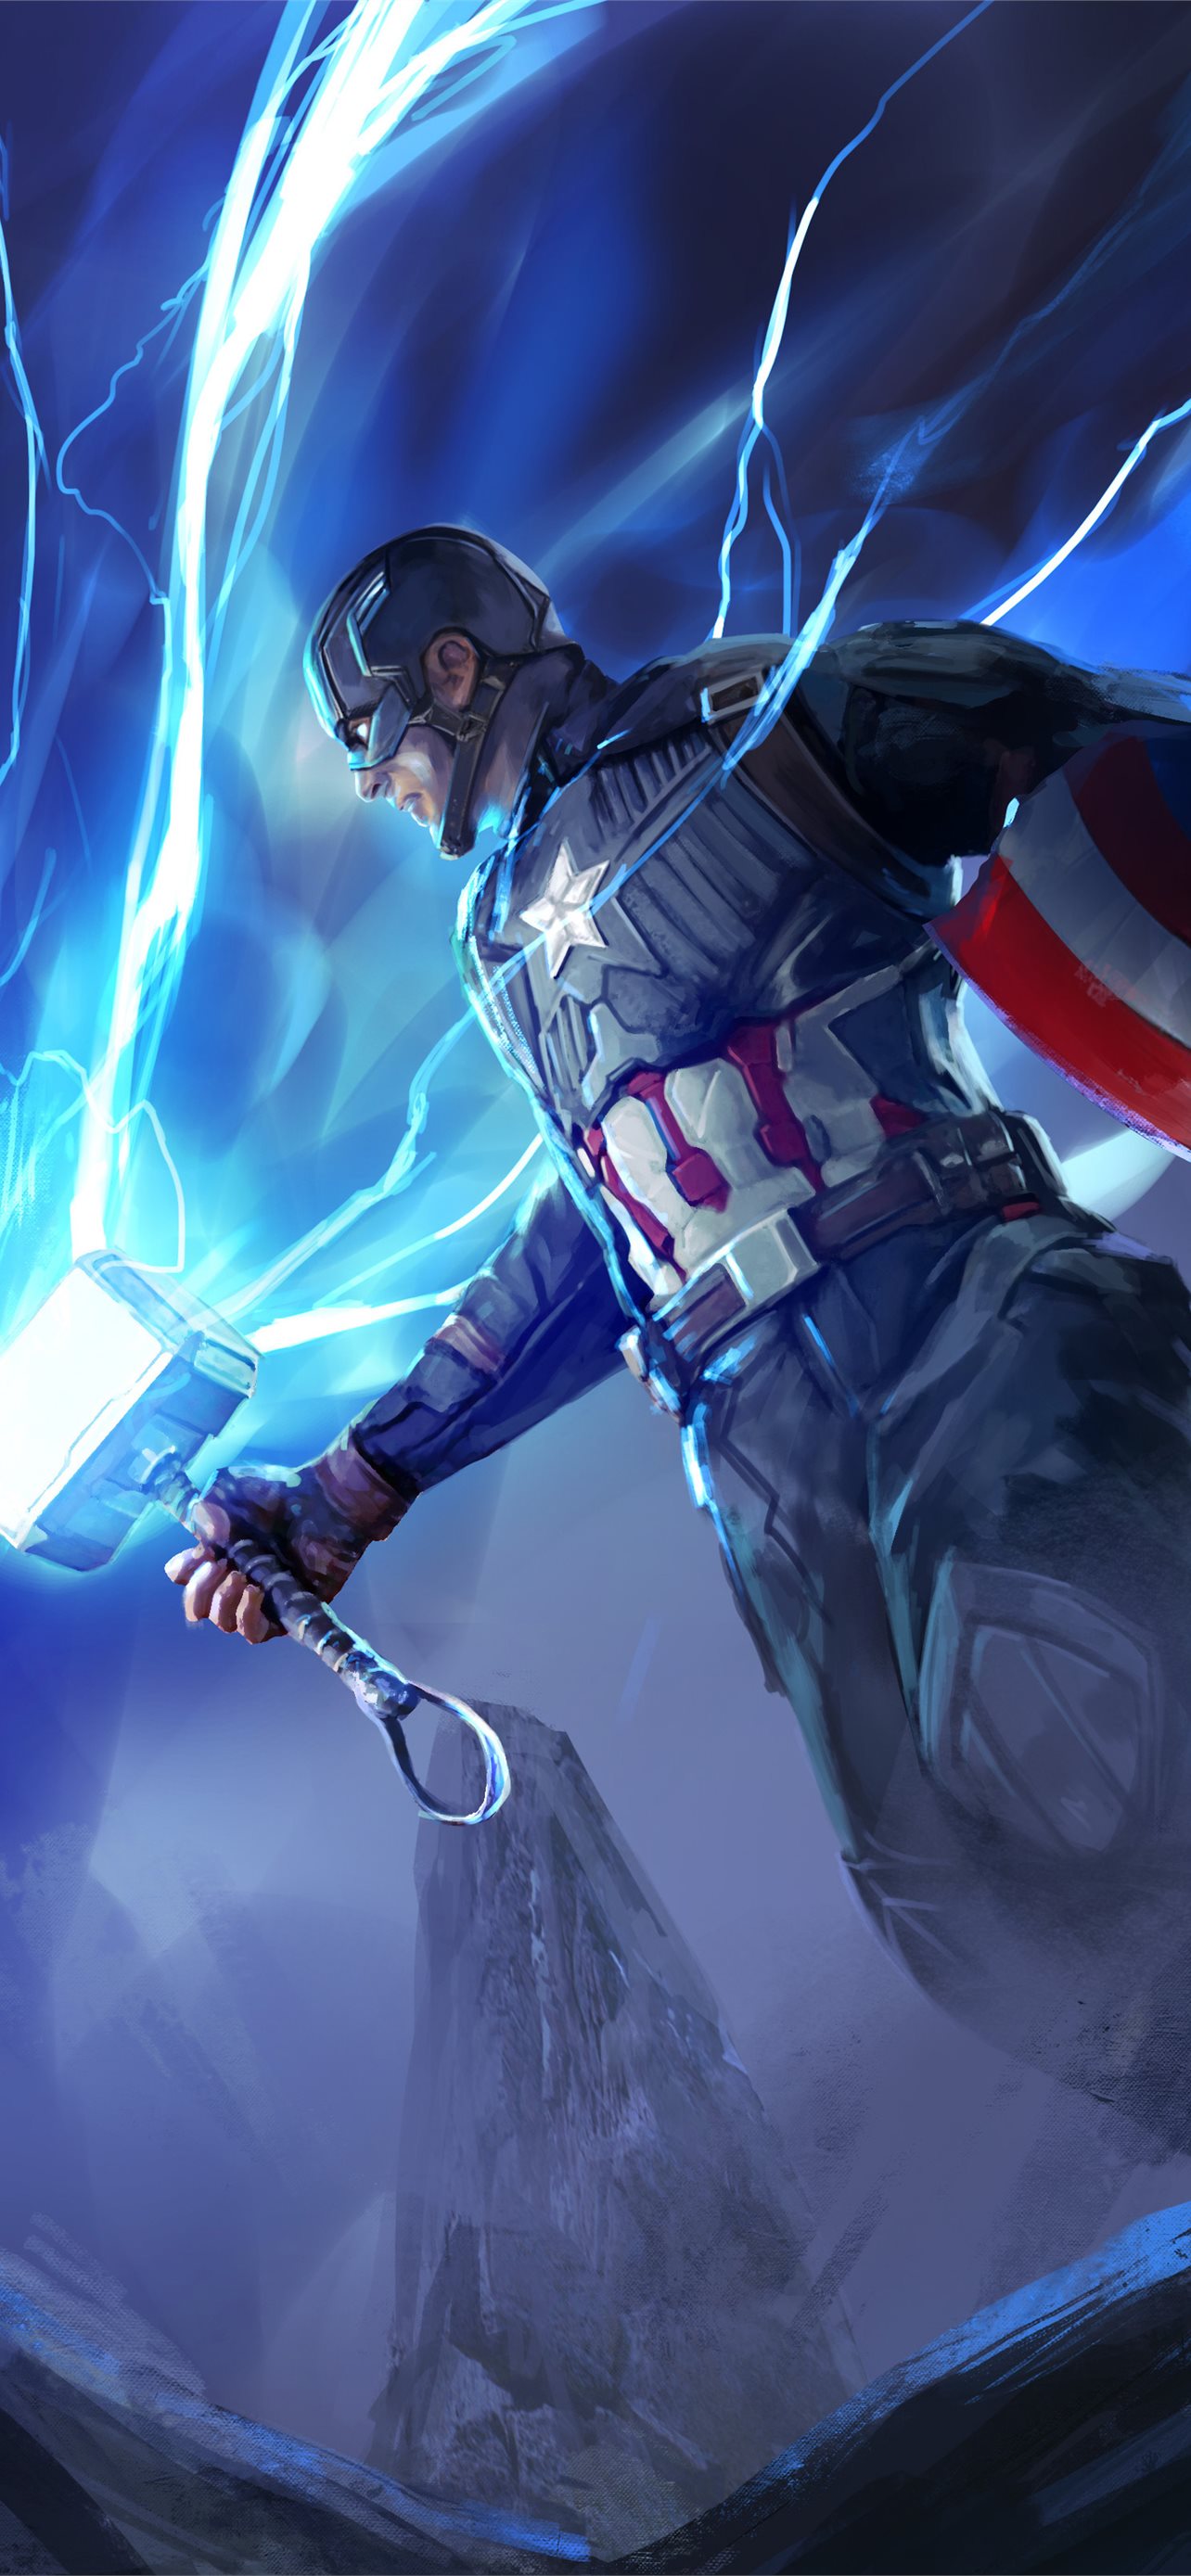 New Captain America Avengers Endgame Samsung Galax... iPhone Wallpapers  Free Download